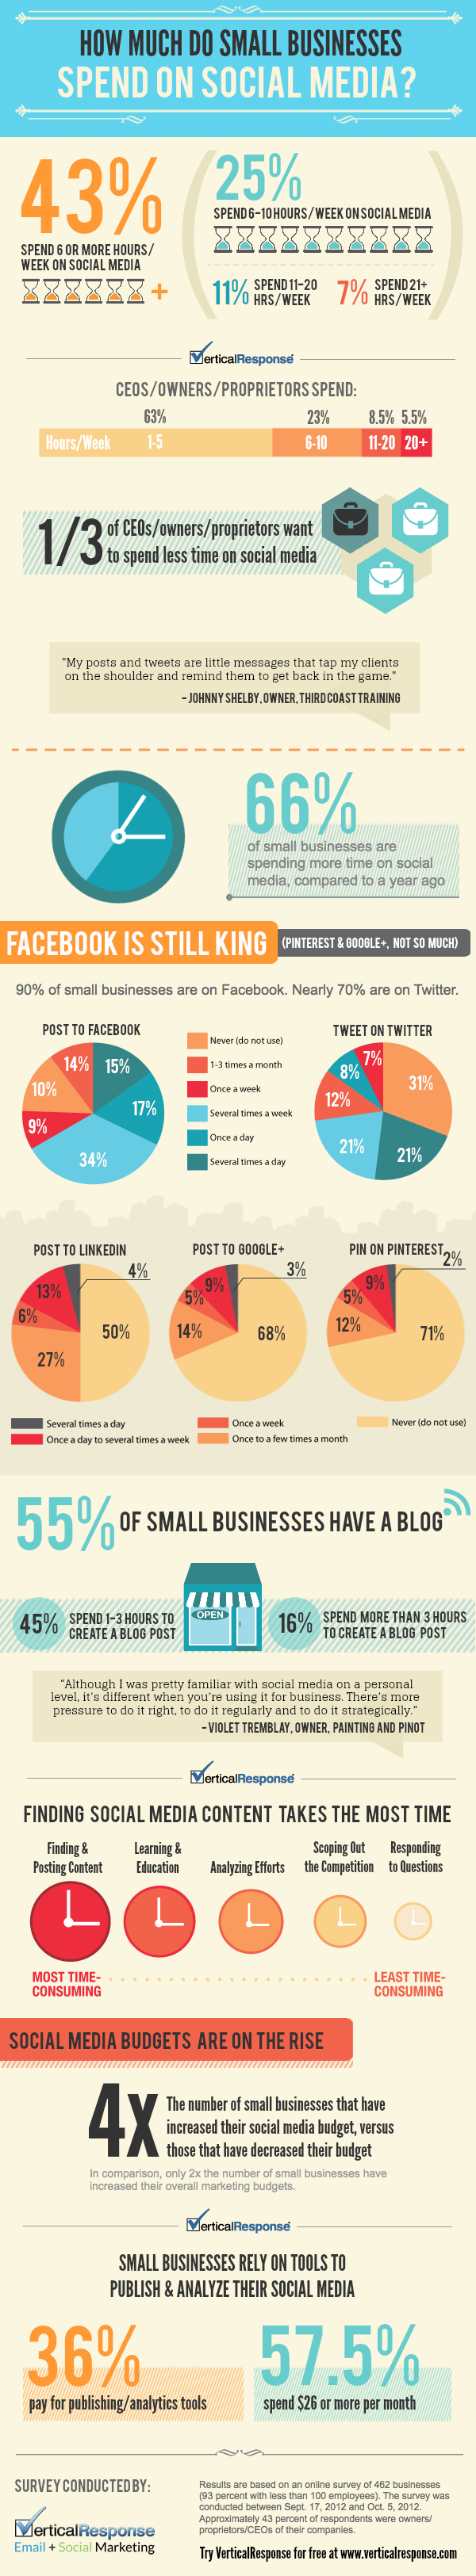 How Much Do Small Businesses Spend on Social Media